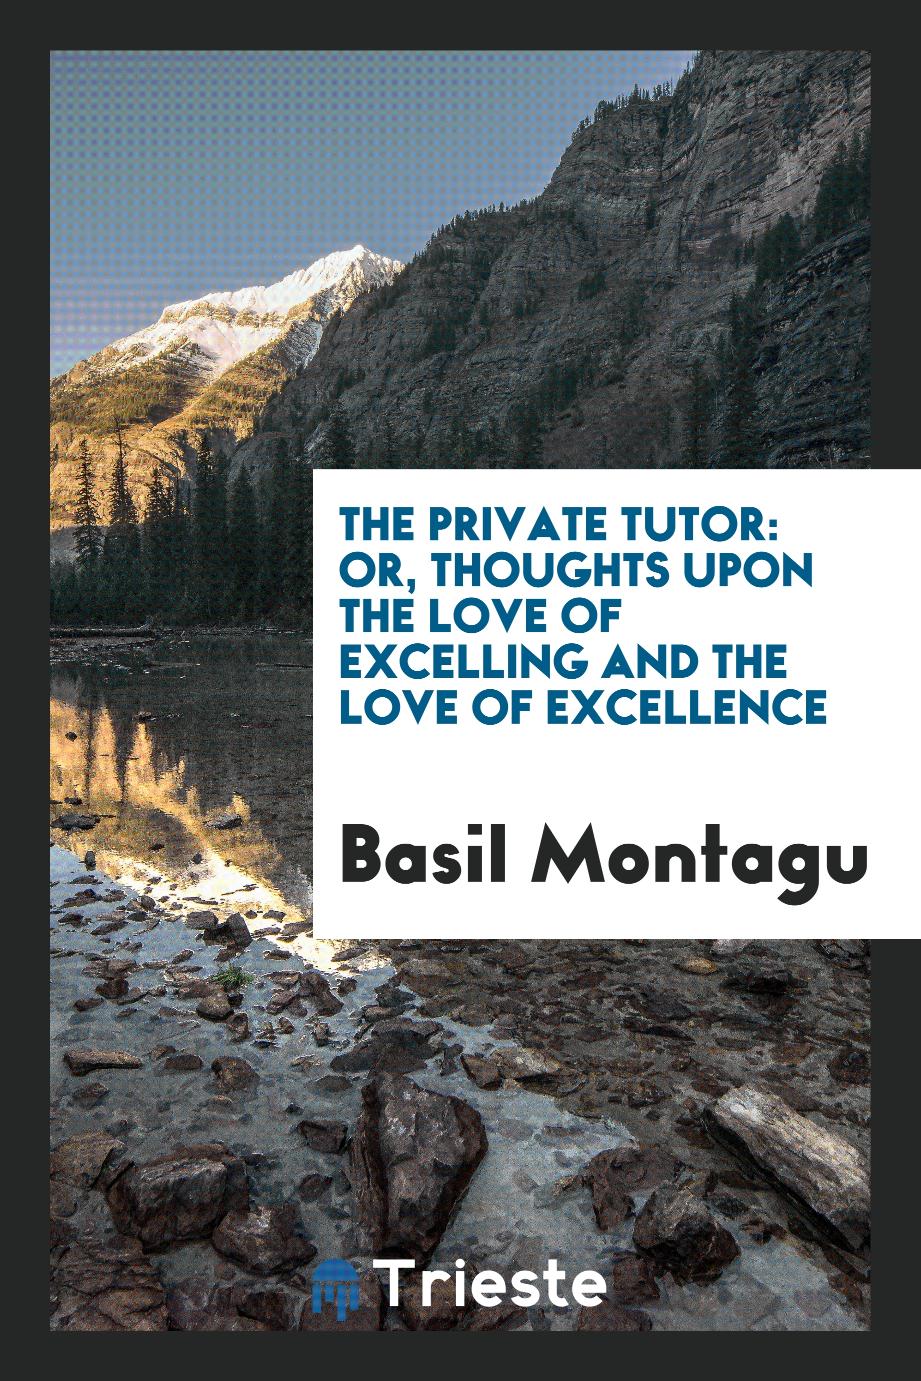 The Private Tutor: Or, Thoughts Upon the Love of Excelling and the Love of Excellence